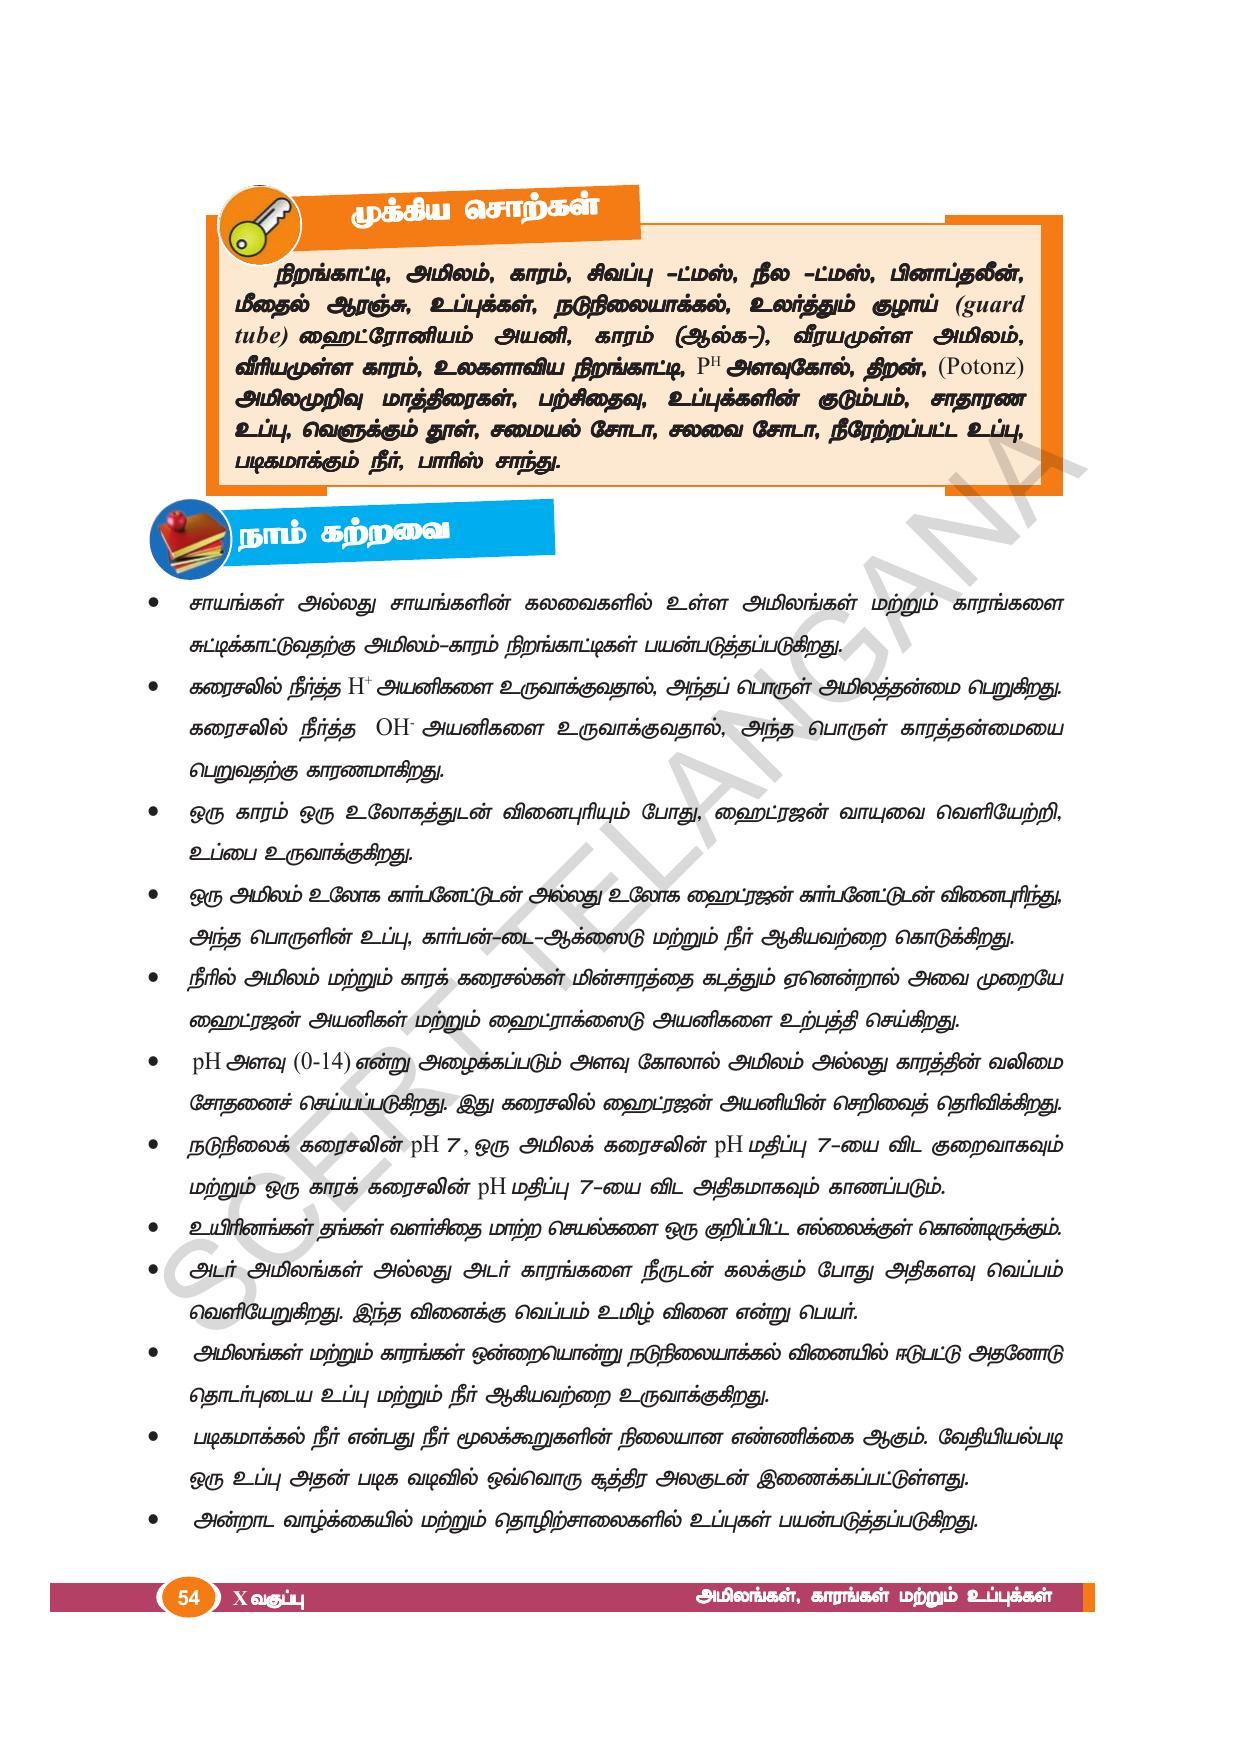 TS SCERT Class 10 Physical Science(Tamil Medium) Text Book - Page 66